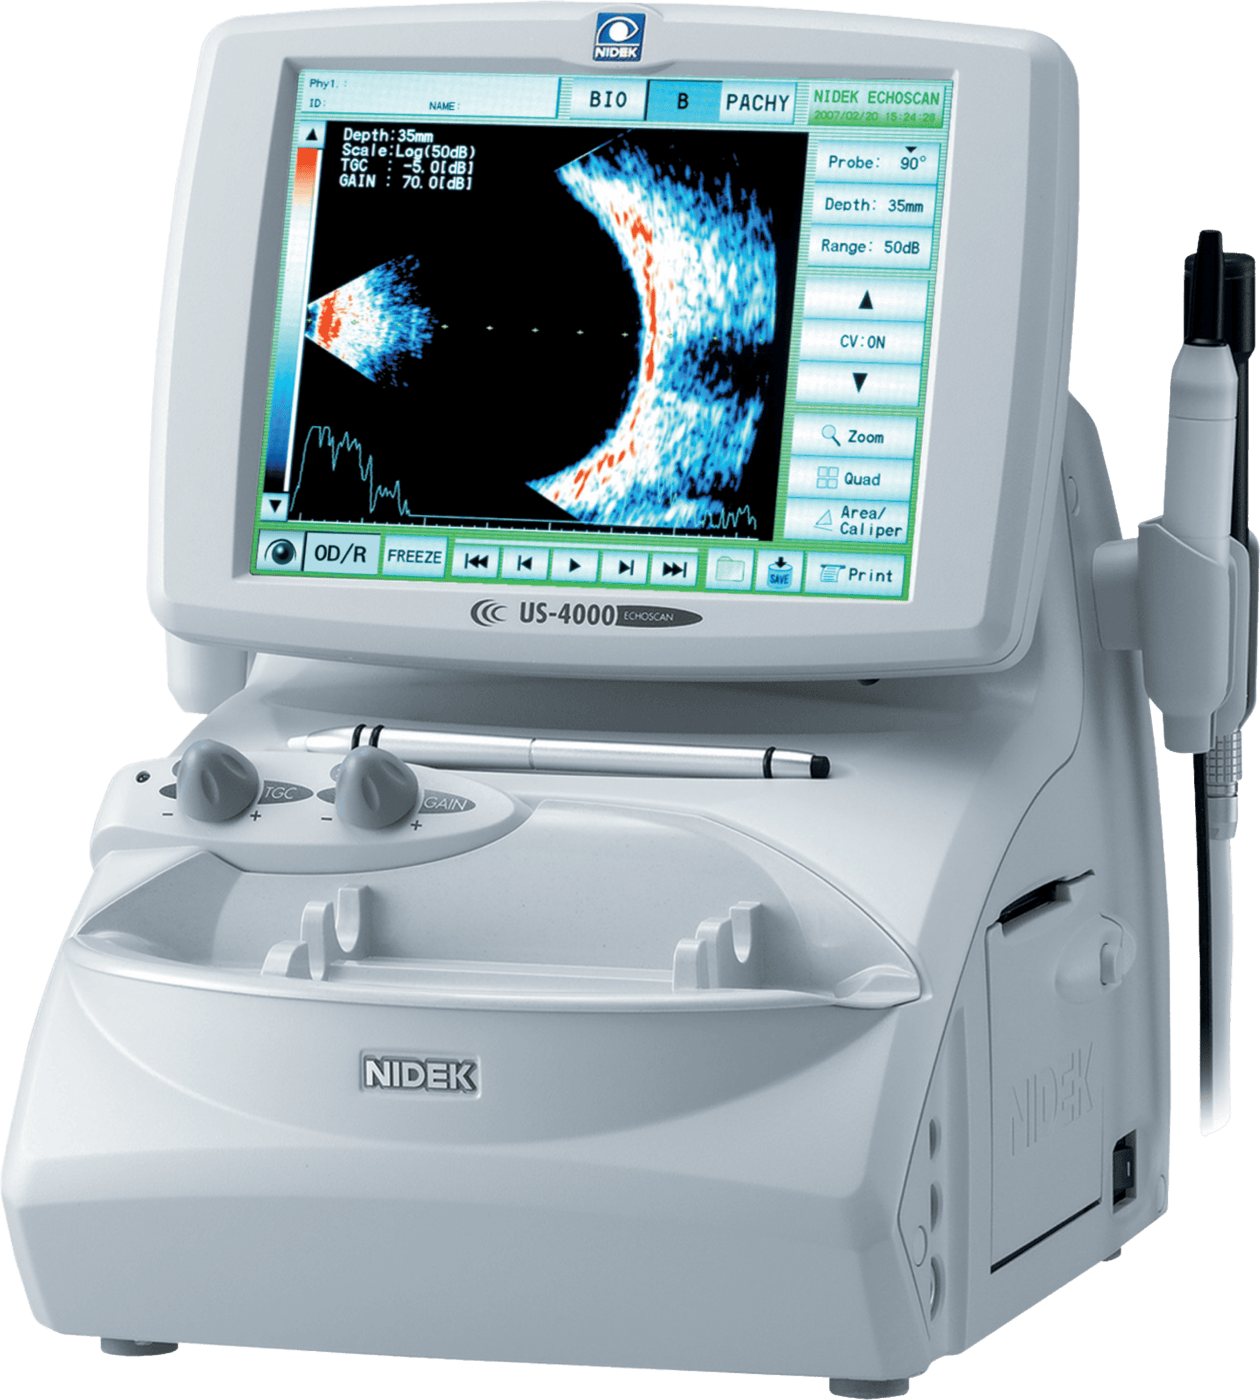 A Nidek Medical Ultrasound Machine Labeled &Quot;Nidek Us-4000 Echograph&Quot; Features A Screen Displaying An Eye Scan. It Has Several Control Knobs, Buttons, And A Connected Probe. The Screen Shows Detailed Imaging With Various Data And Settings.